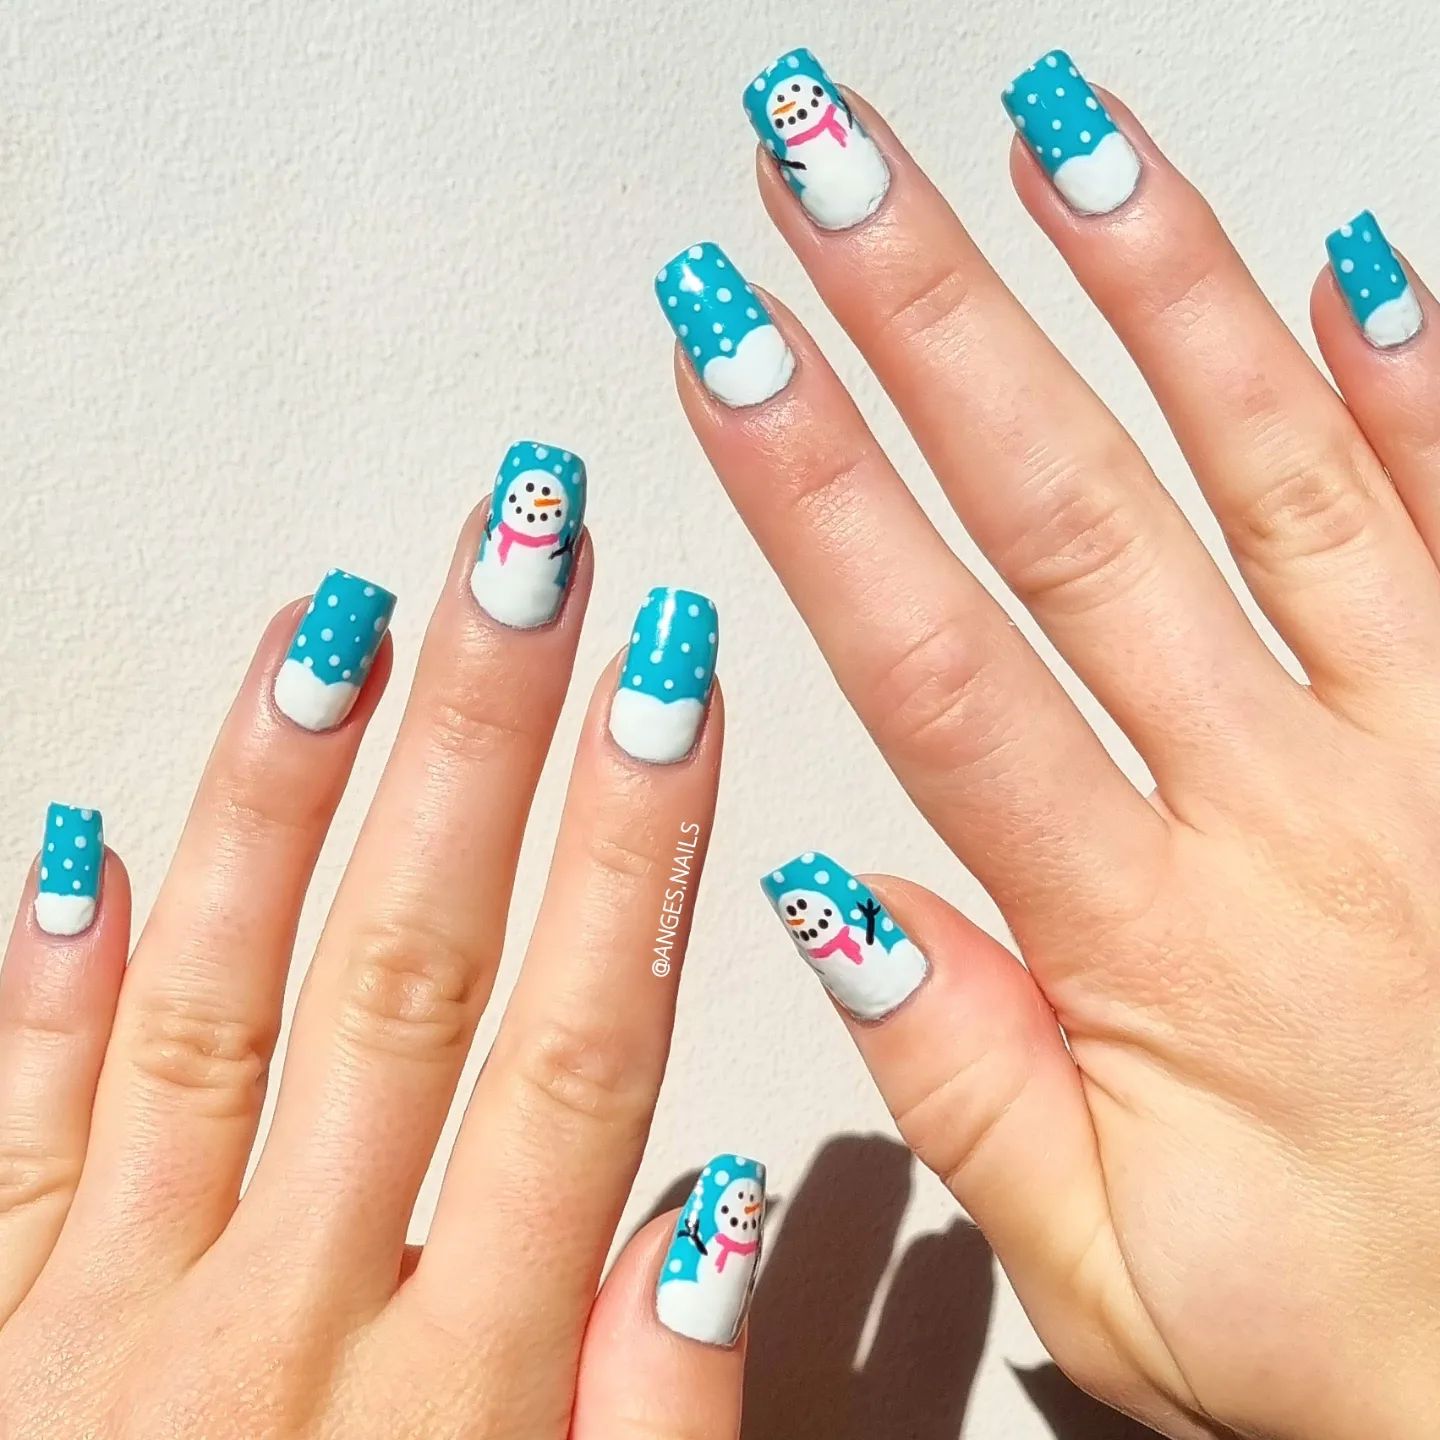 Snowmen again! They are adorable and one of the best way to use them is to have light blue base nails. In this way, they will stand out easily.